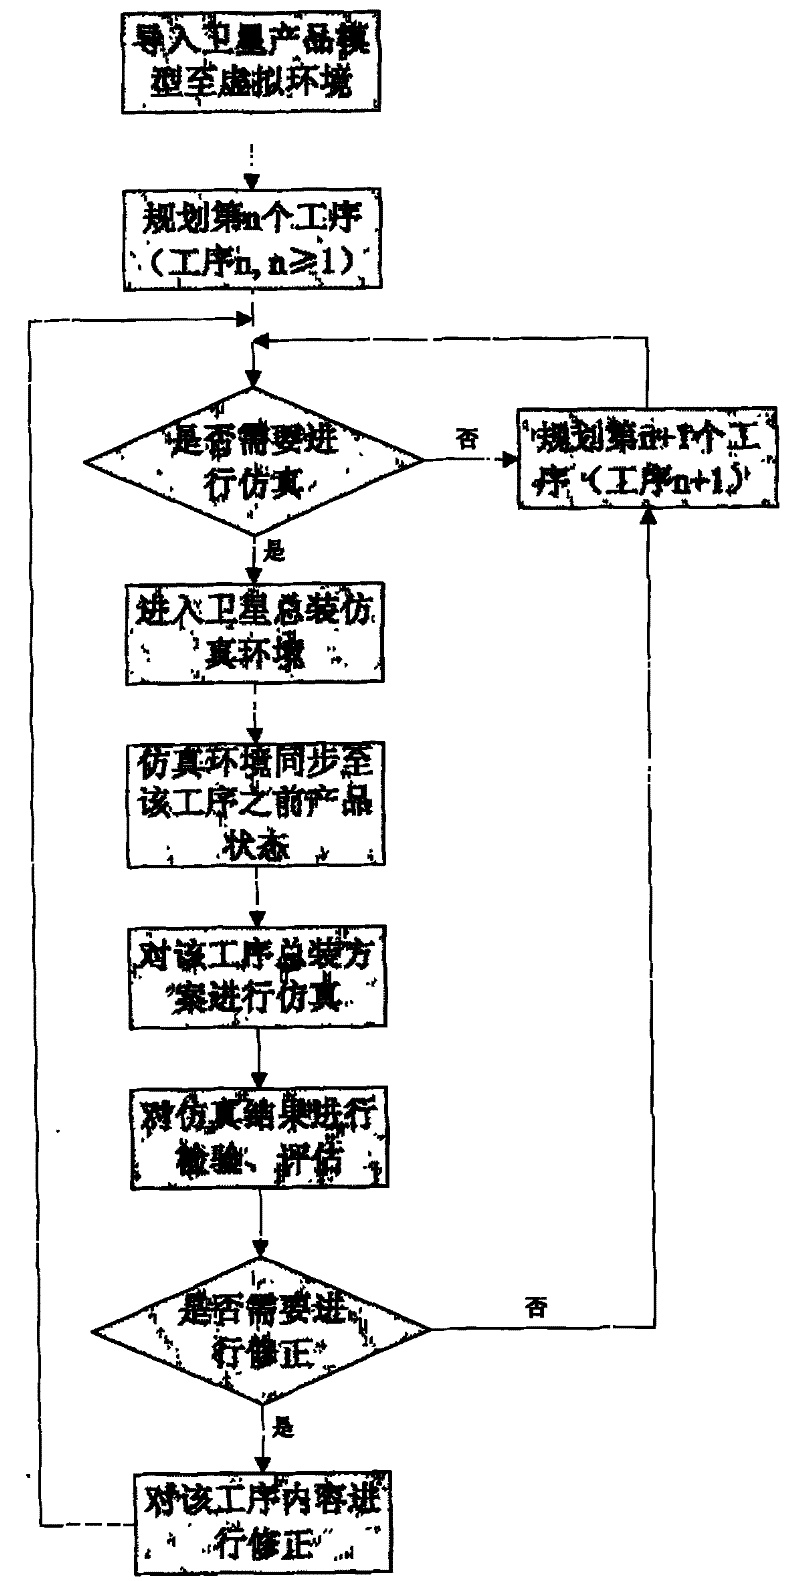 Two-dimensional three-dimensional combined satellite general assembly process planning and simulation method